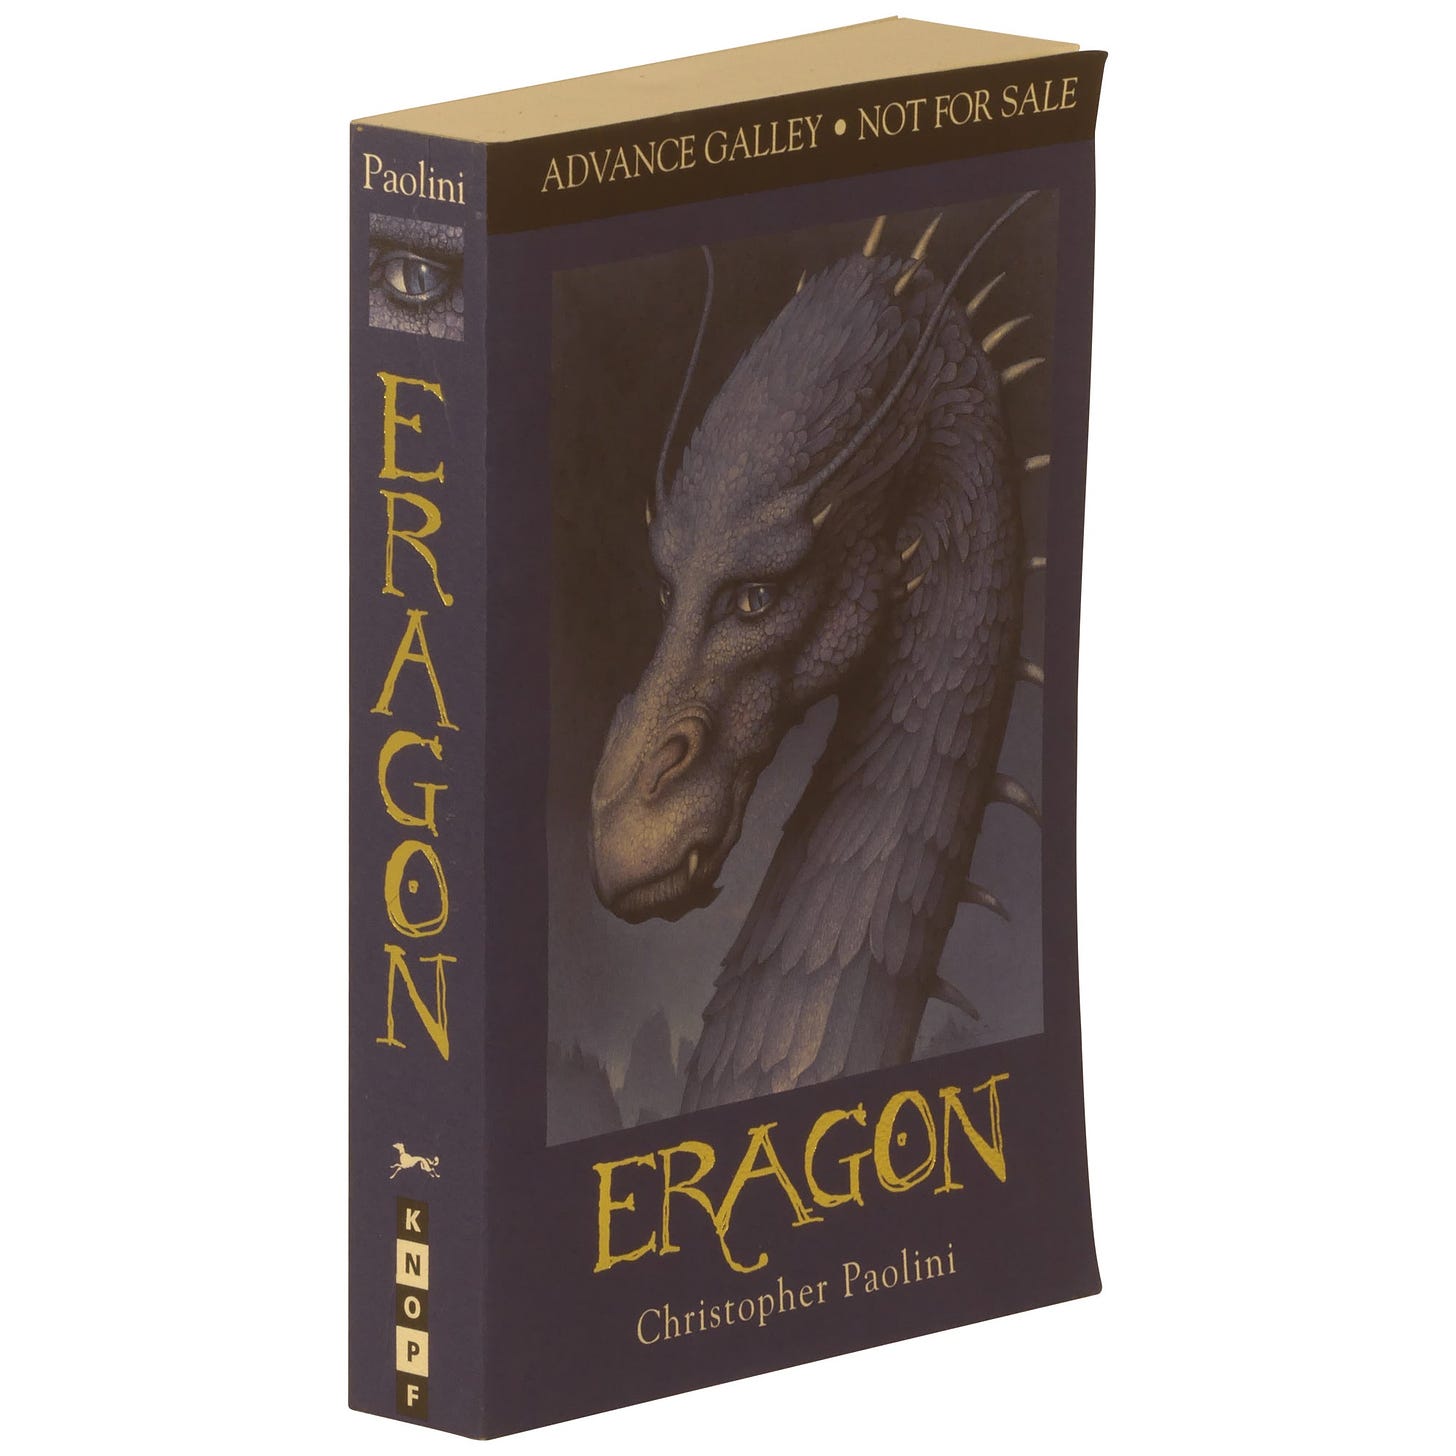 The advance galley of Christopher Paolini's Eragon